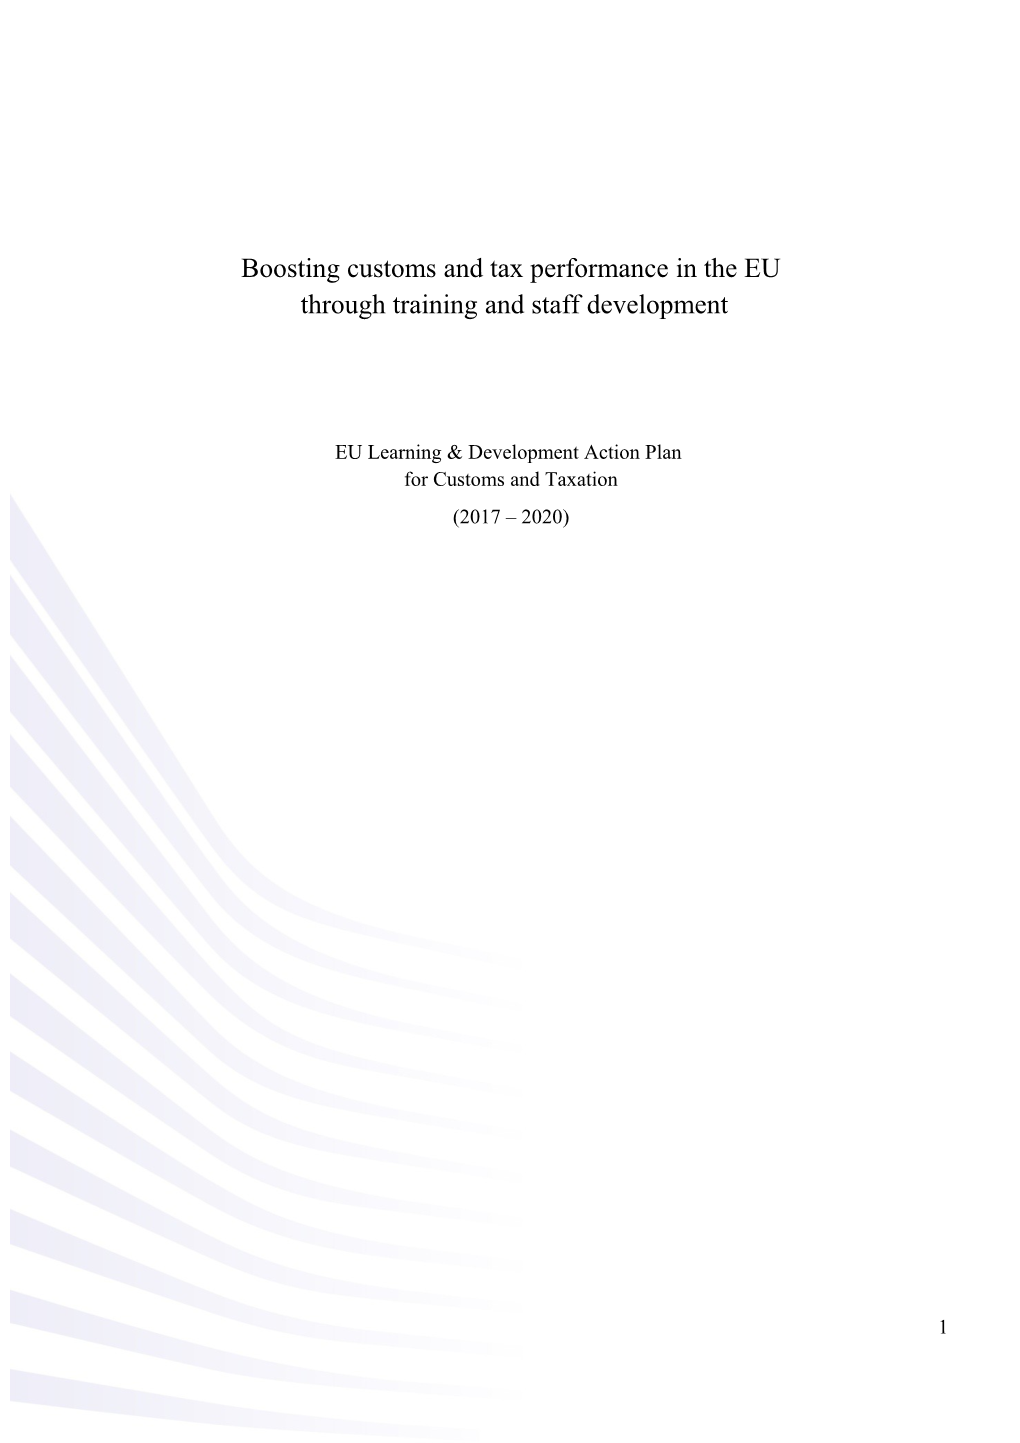 Boosting Customs and Tax Performance in the EU Throughtraining and Staff Development